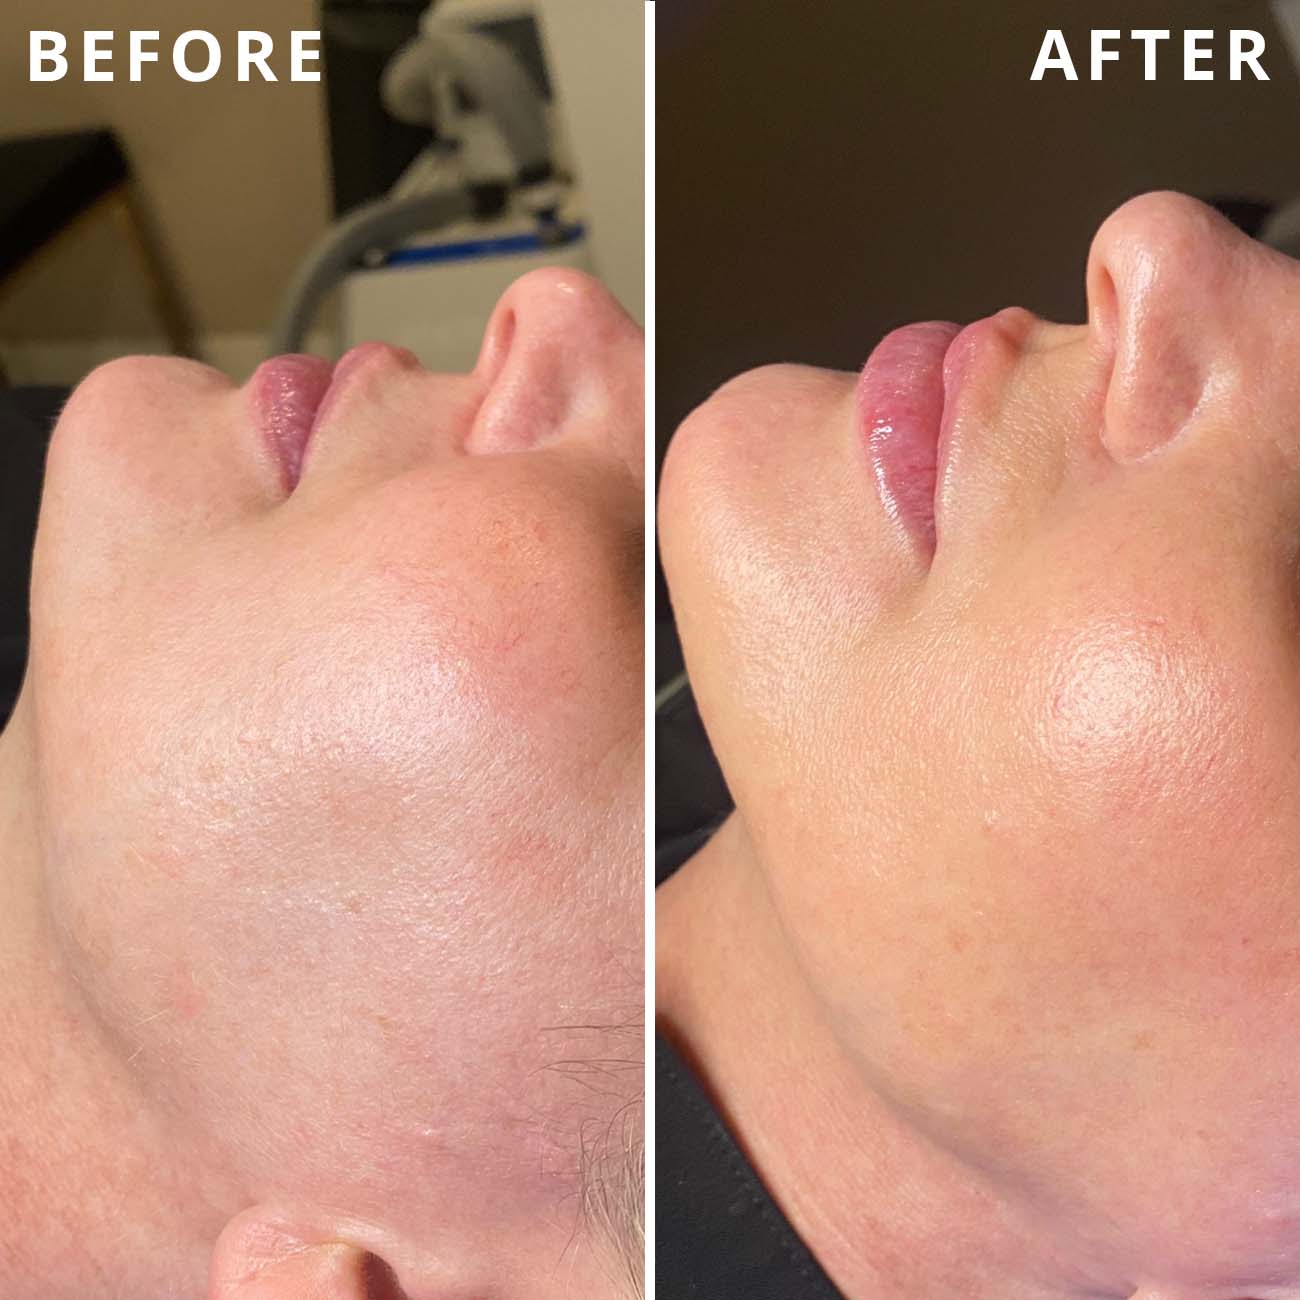 Woman's face before and after hydrafacial in SLC.